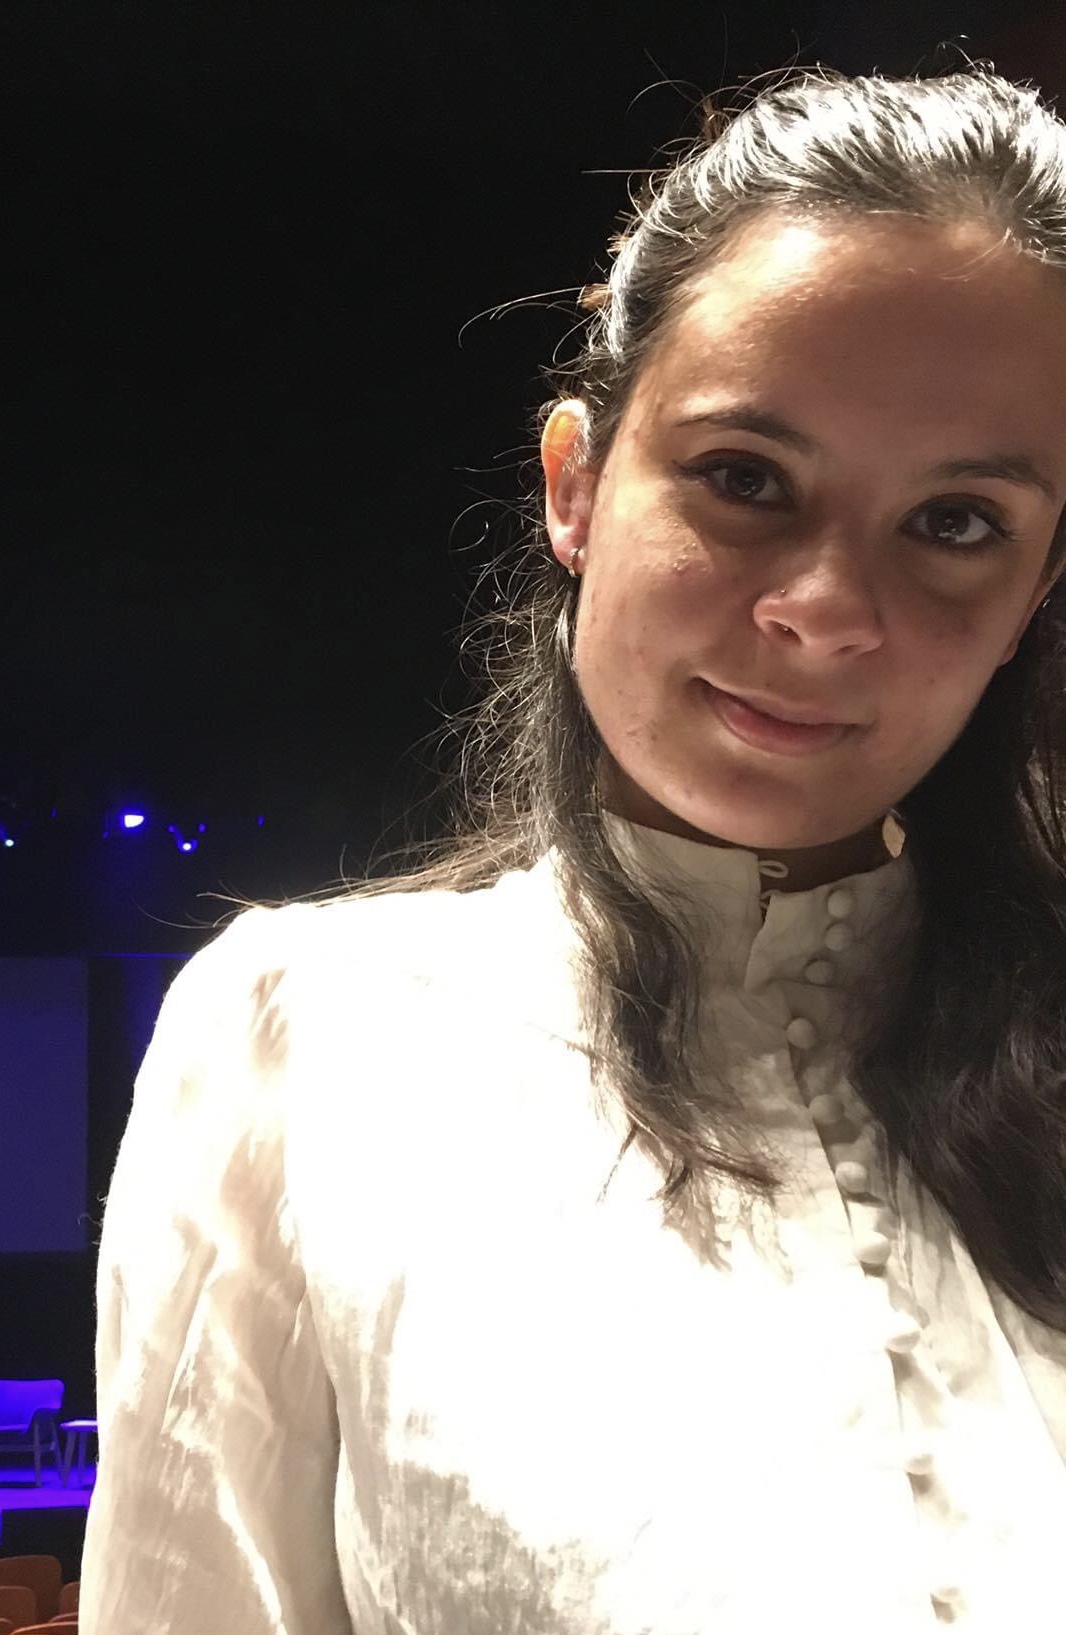 A mixed-race, medium-skinned woman in her mid-twenties. She has dark brown hair in a half-up half-down style, and is wearing a white button-up shirt.